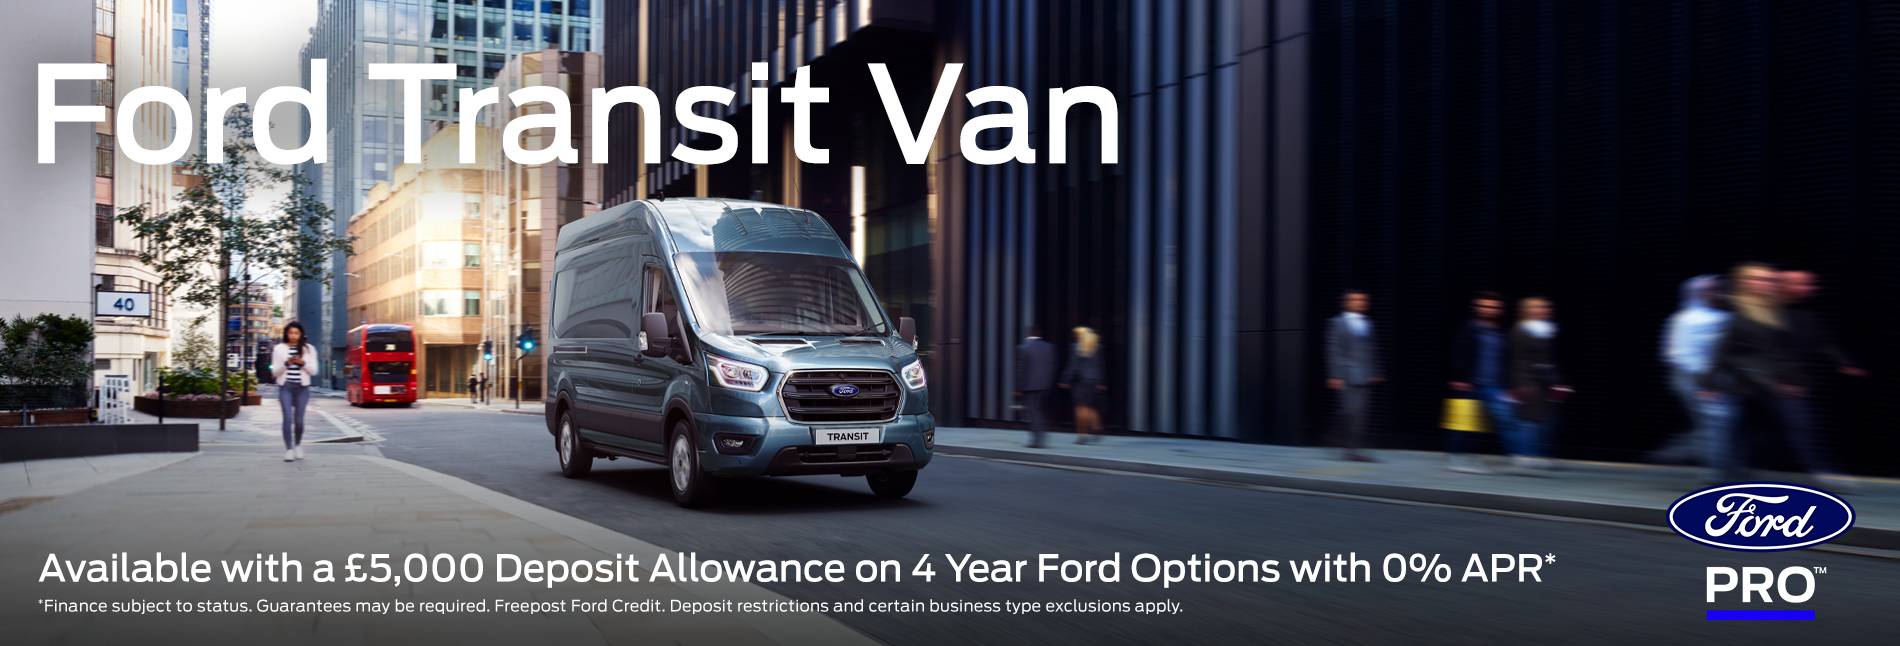 Ford Transit offer Cardiff